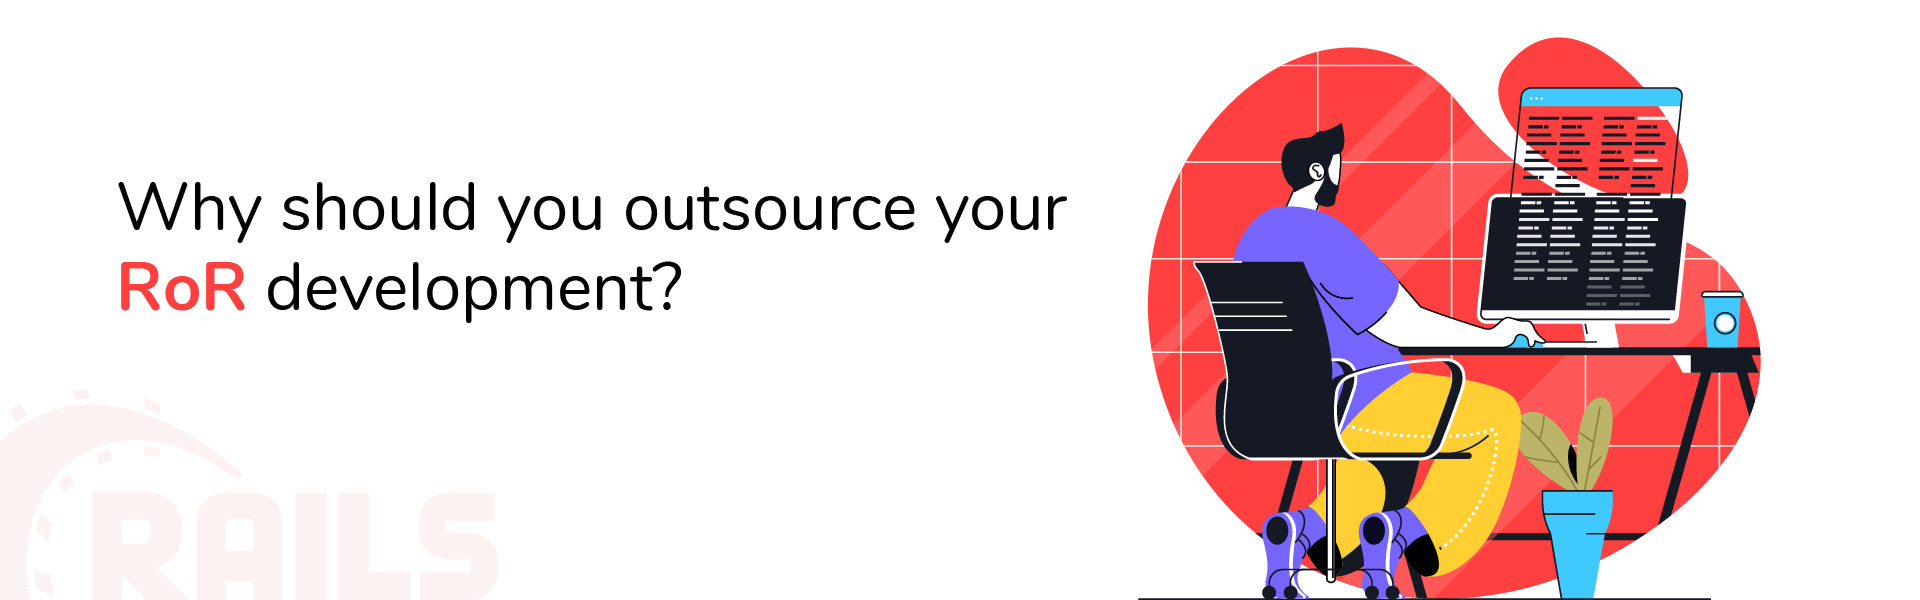 Why should you outsource your RoR Development?